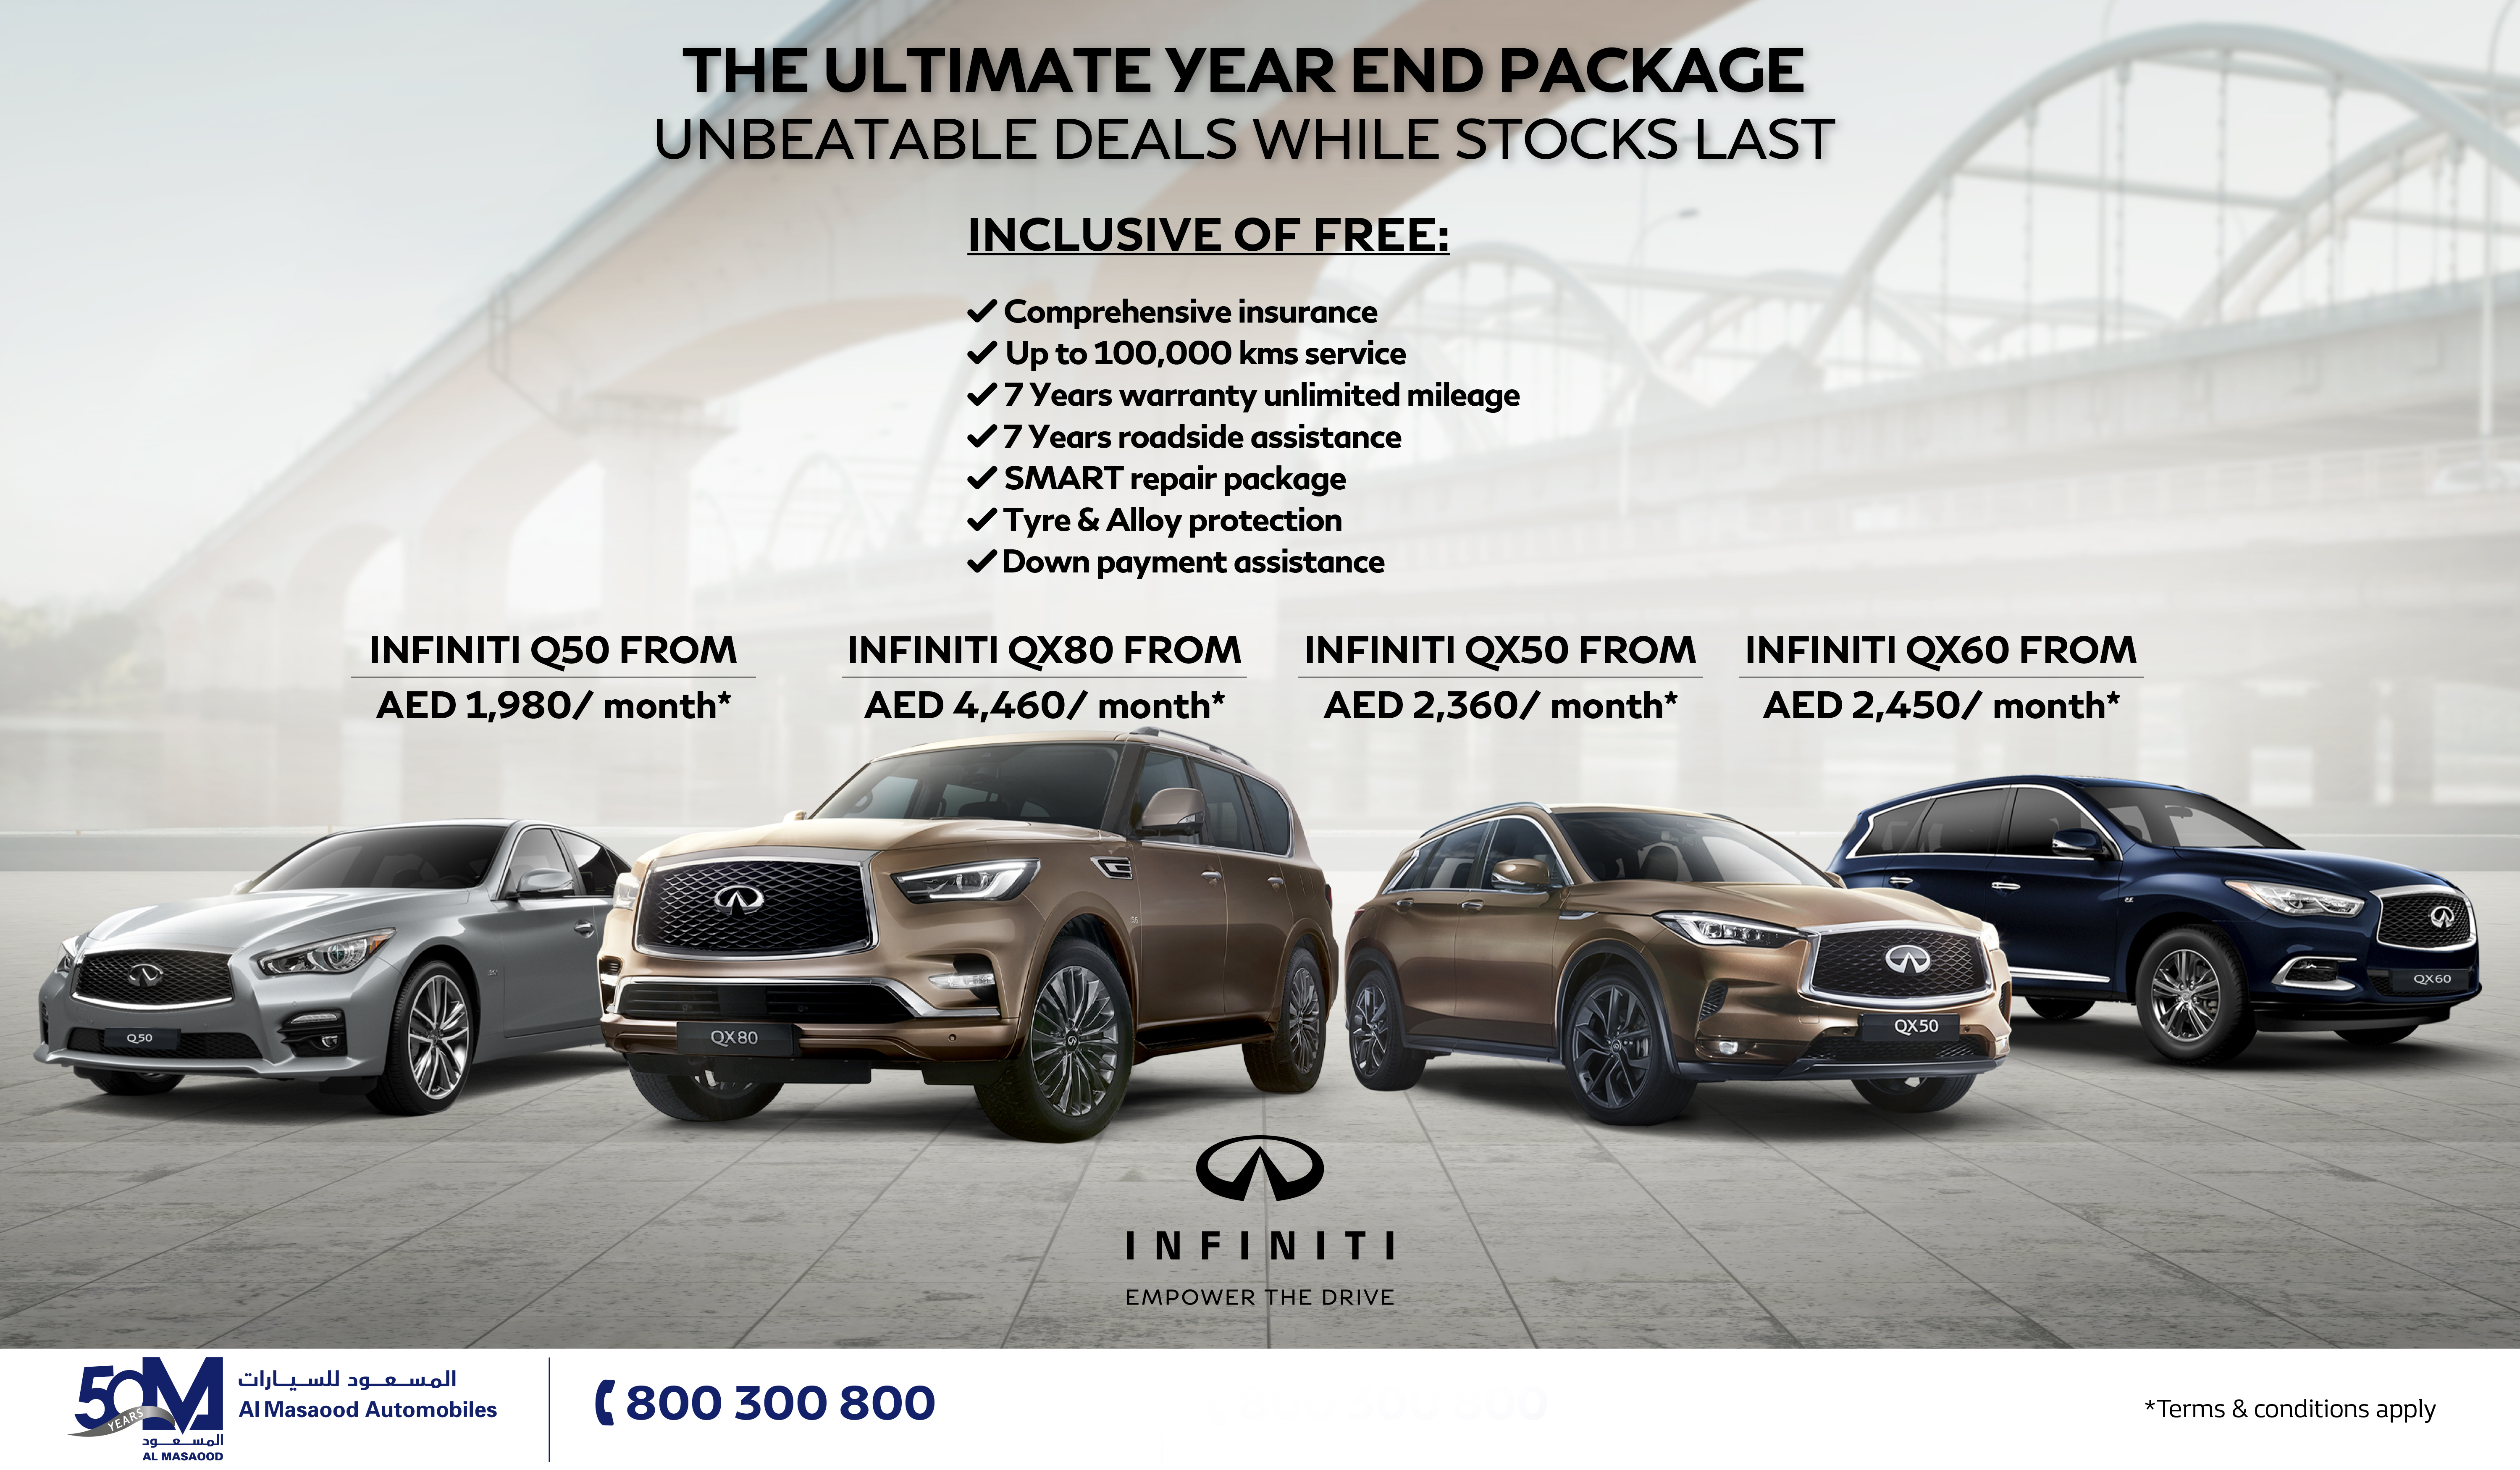 Al Masaood Automobiles Unveils Ultimate Year-End Package for New INFINITI Vehicles